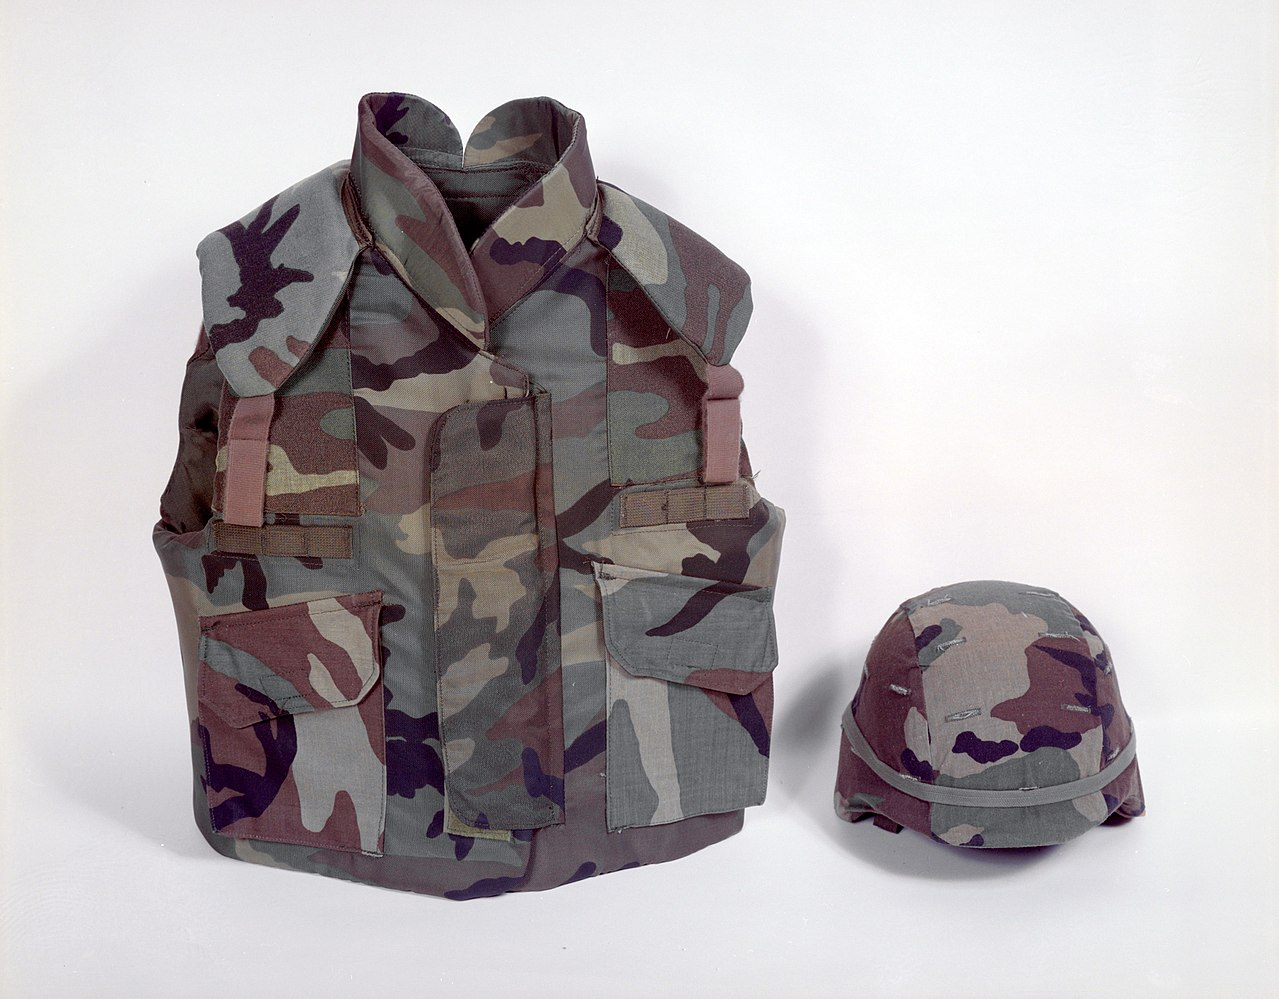 The Personnel Armor System for Ground Troops ballistic vest & helmet